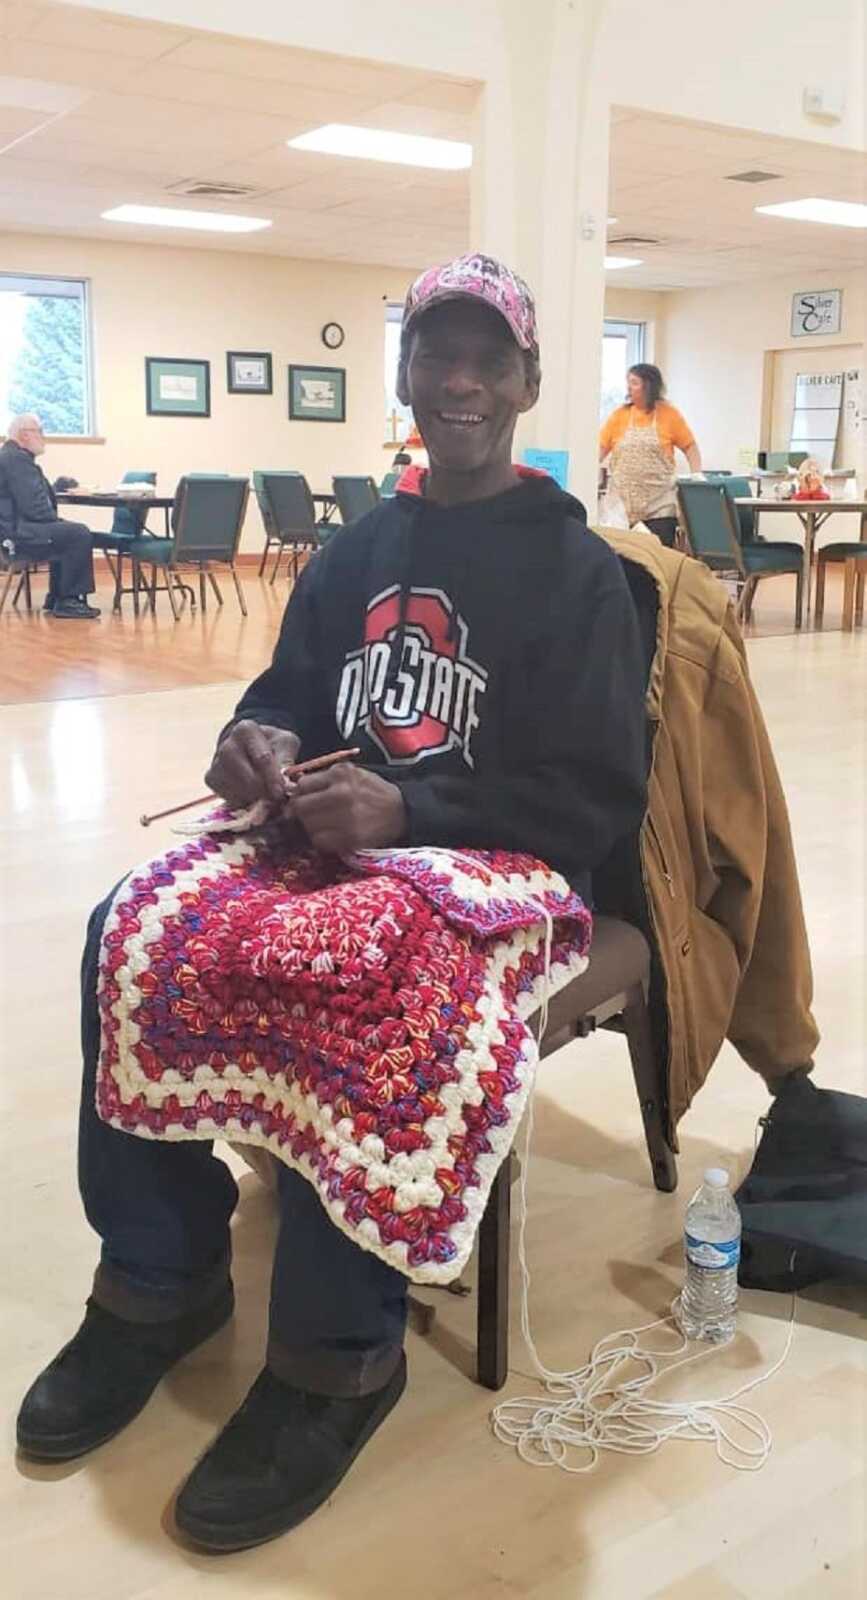 Larry crochets lap blankets for homeless people in his community.